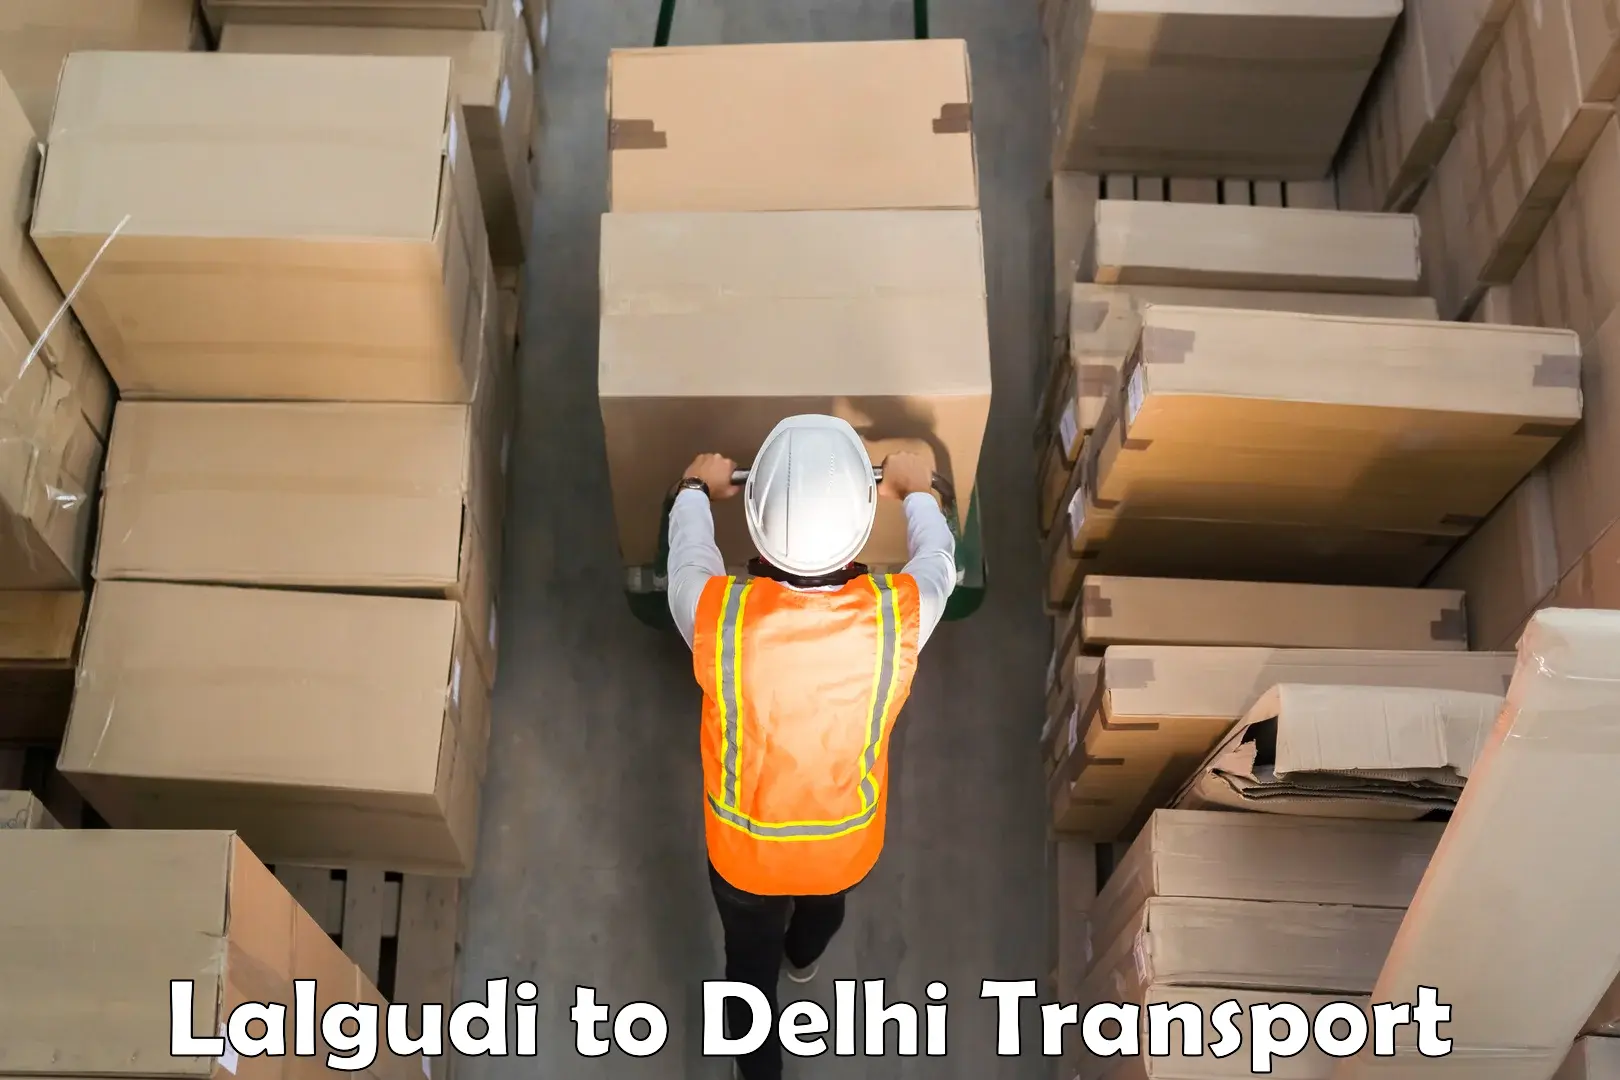 Transport bike from one state to another Lalgudi to IIT Delhi